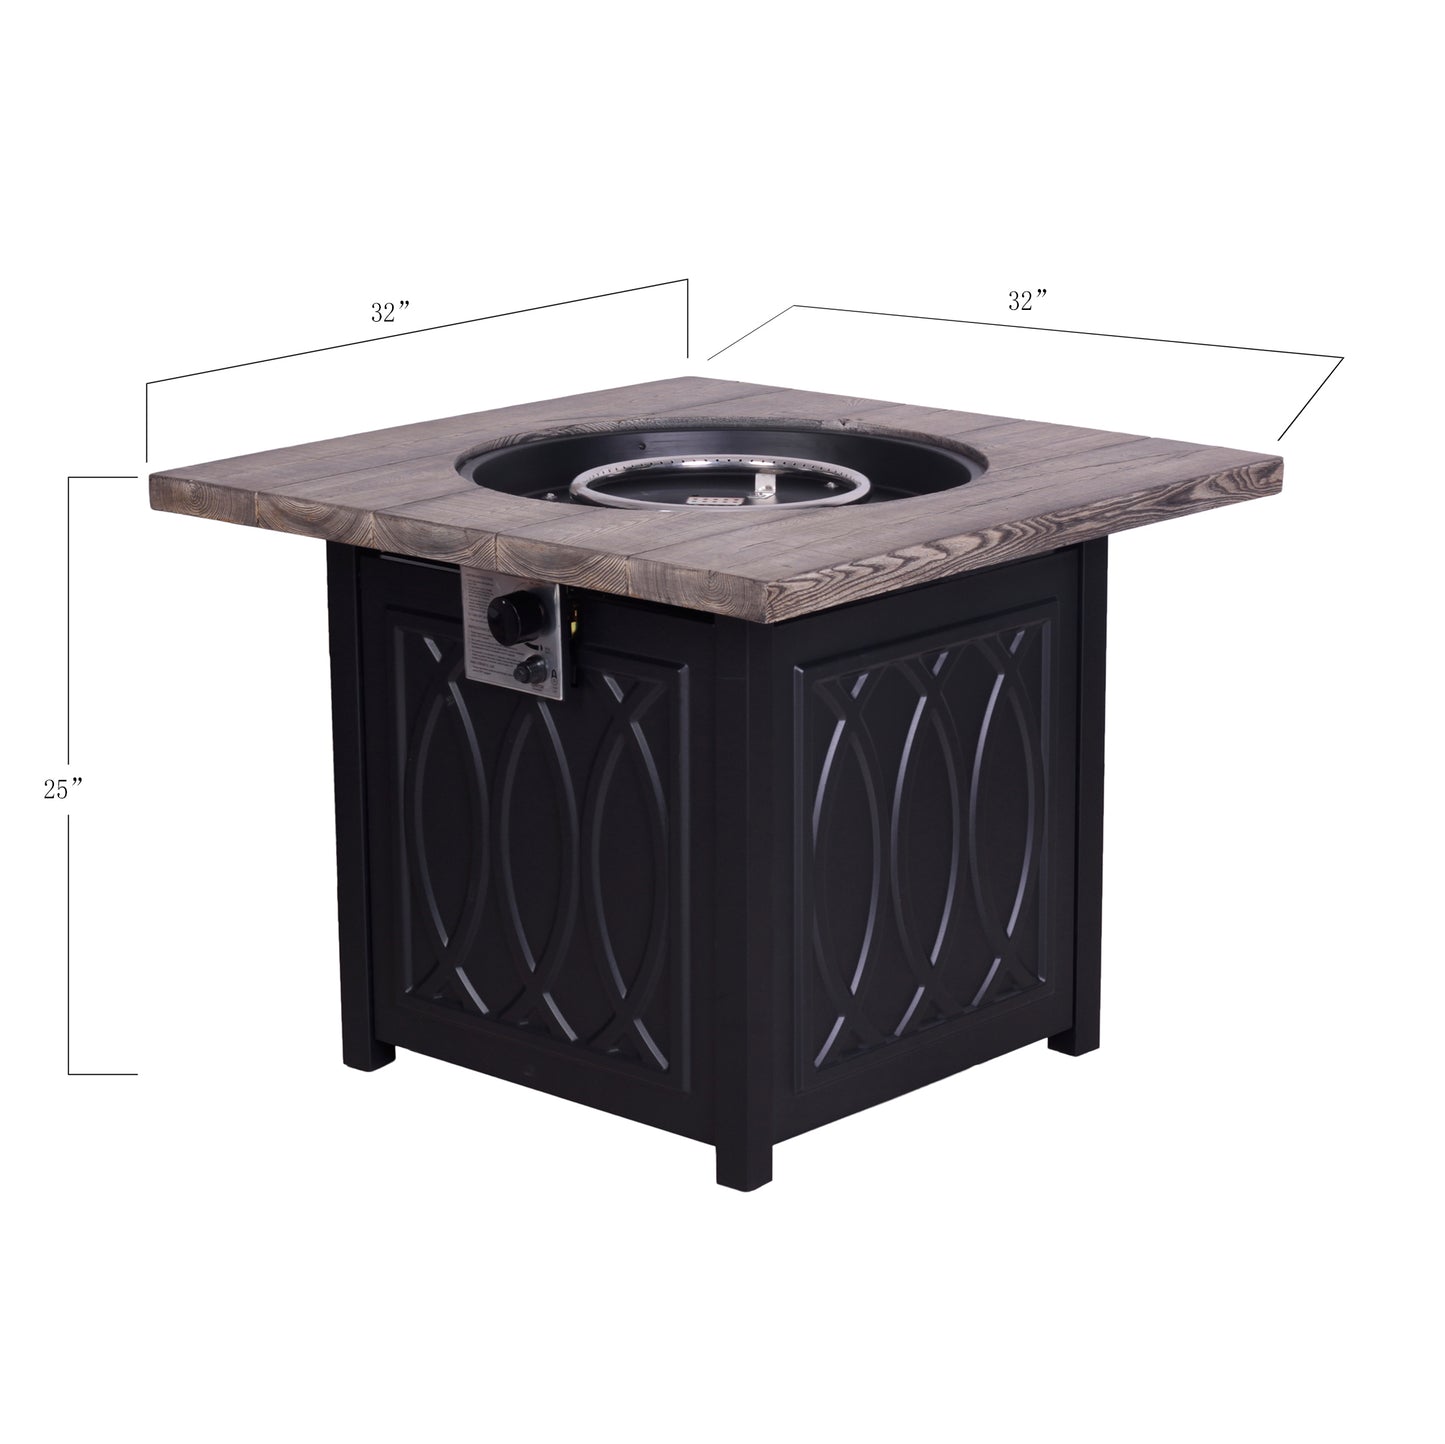 32-inch Faux Woodgrain Propane Outdoor Fire Pit Table